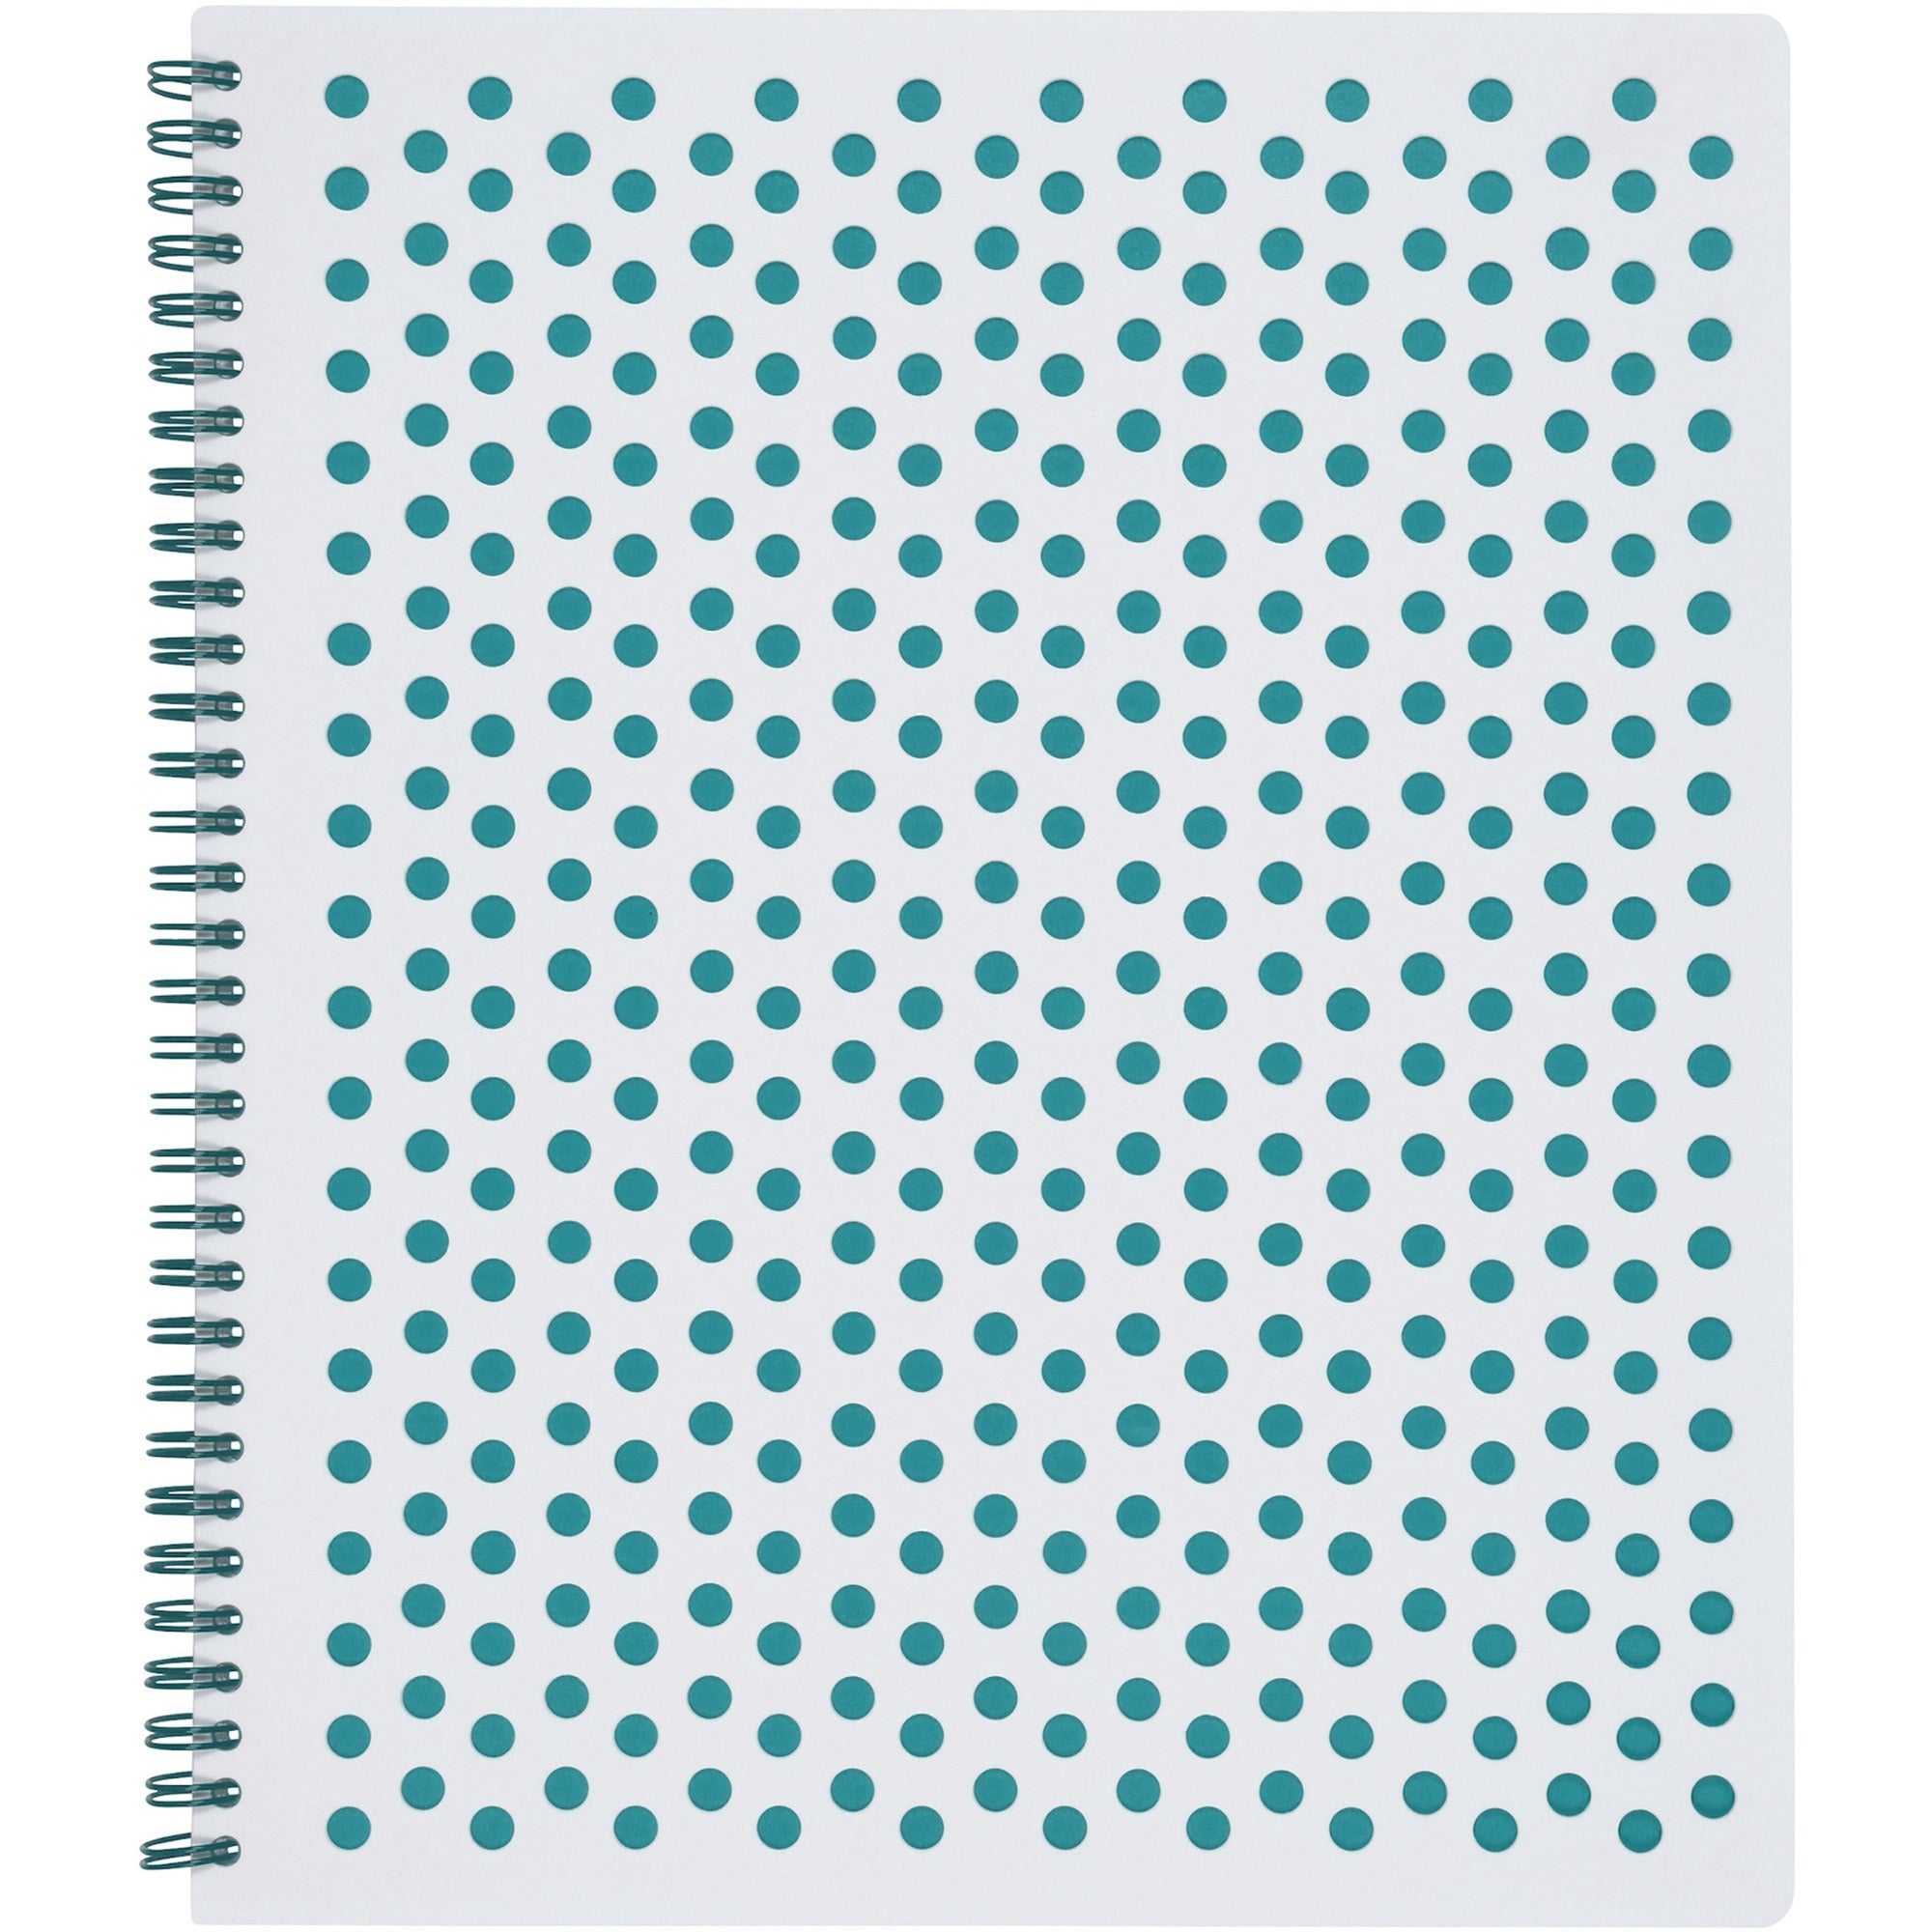 tops-polka-dot-design-spiral-notebook-double-wire-spiral-college-ruled-3-holes-11-x-9-teal-polka-dot-cover-micro-perforated-hole-punched-durable-wear-resistant-damage-resistant-1-each_top69735 - 1